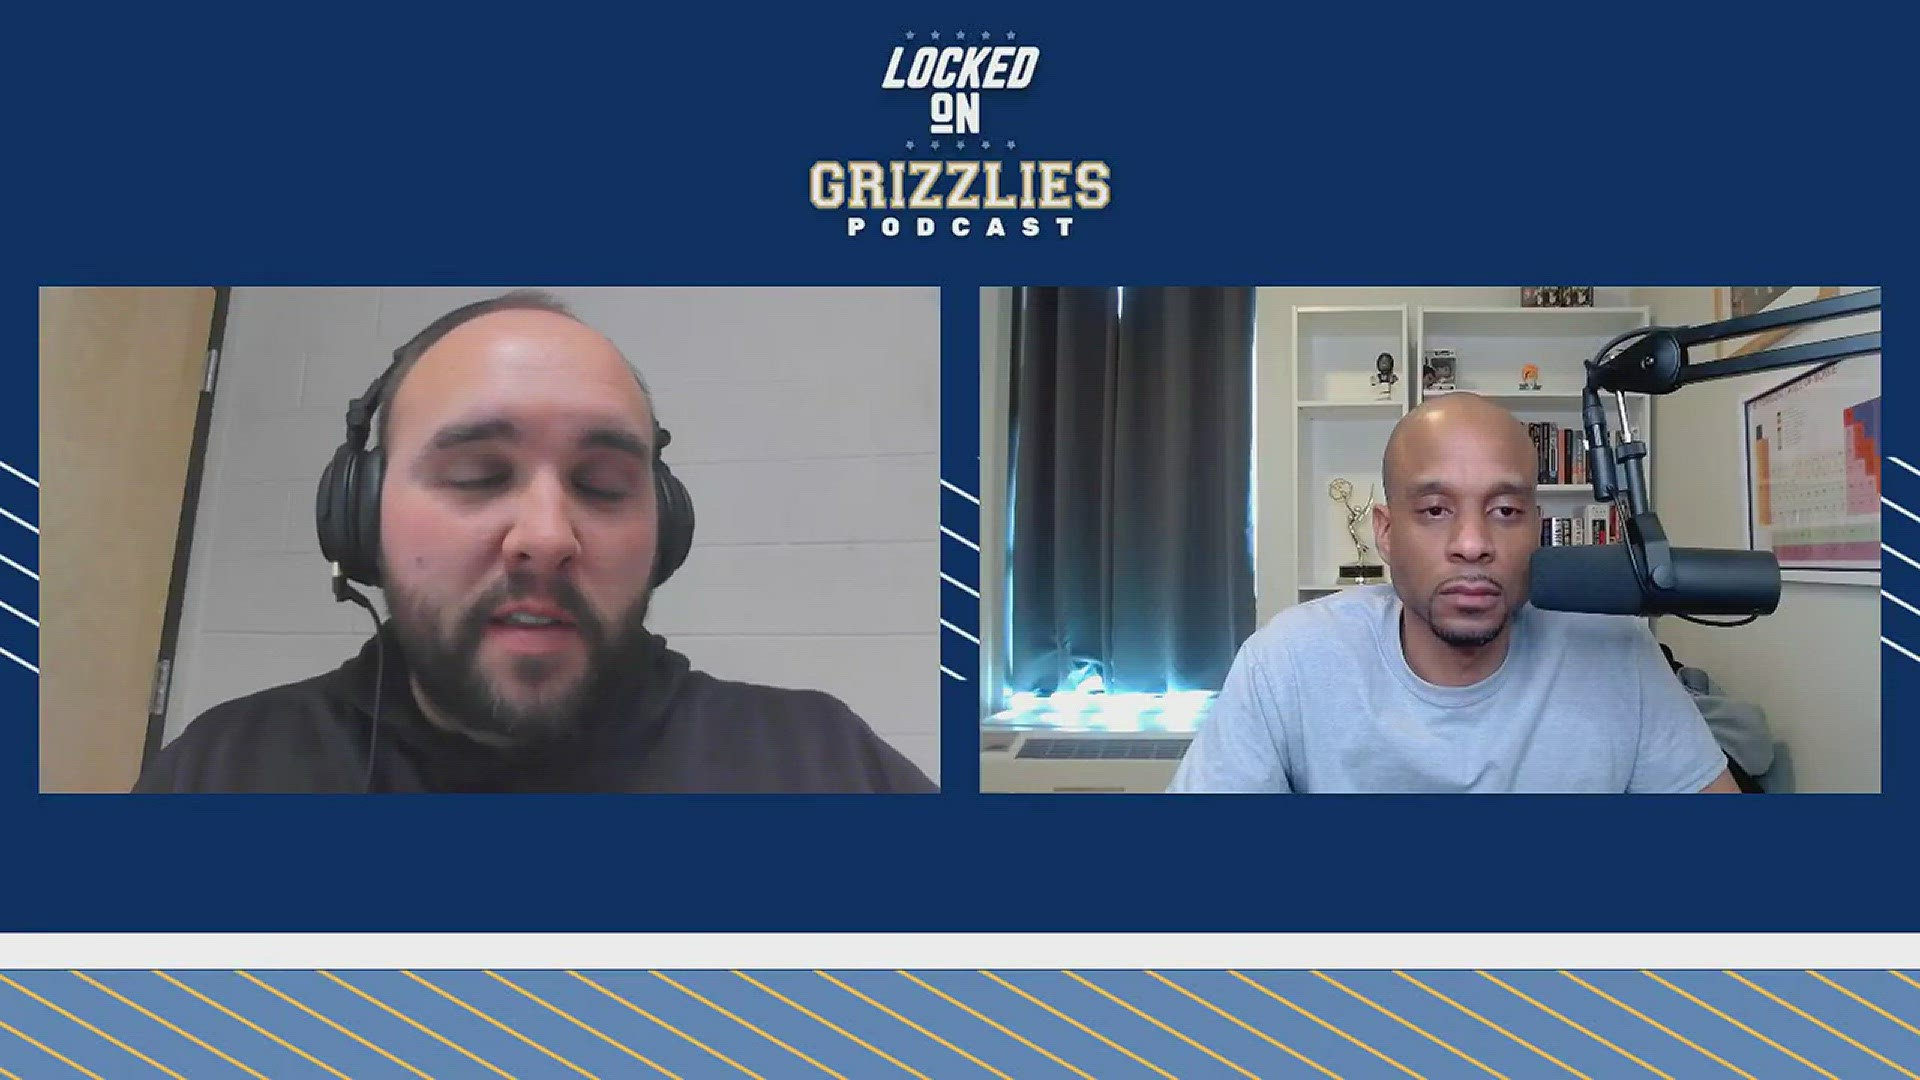 HBO and ESPN sports commentator Bomani Jones joined the Locked On Grizzlies podcast to discuss Ja Morant’s misdeeds, the fallout, and where Memphis goes from here.